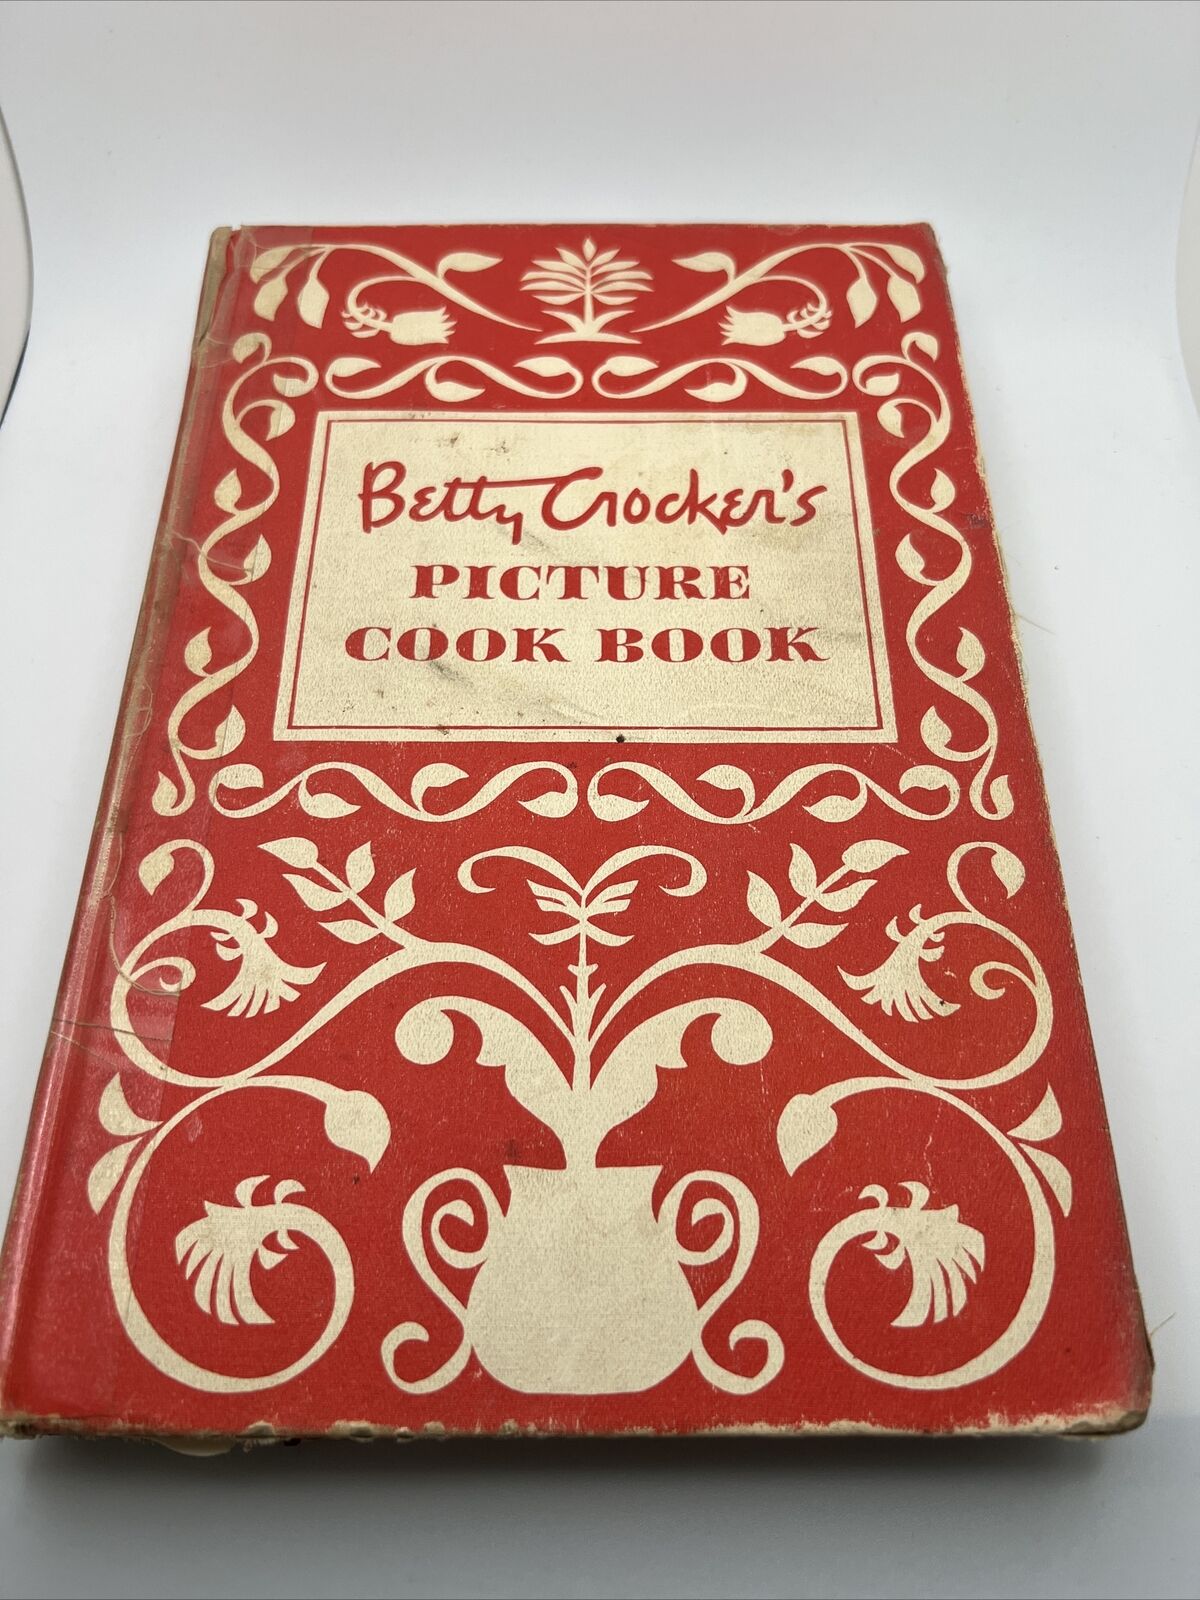 Vintage Betty Crocker's Picture Cook Book 1950s Vintage Hardcover Book.